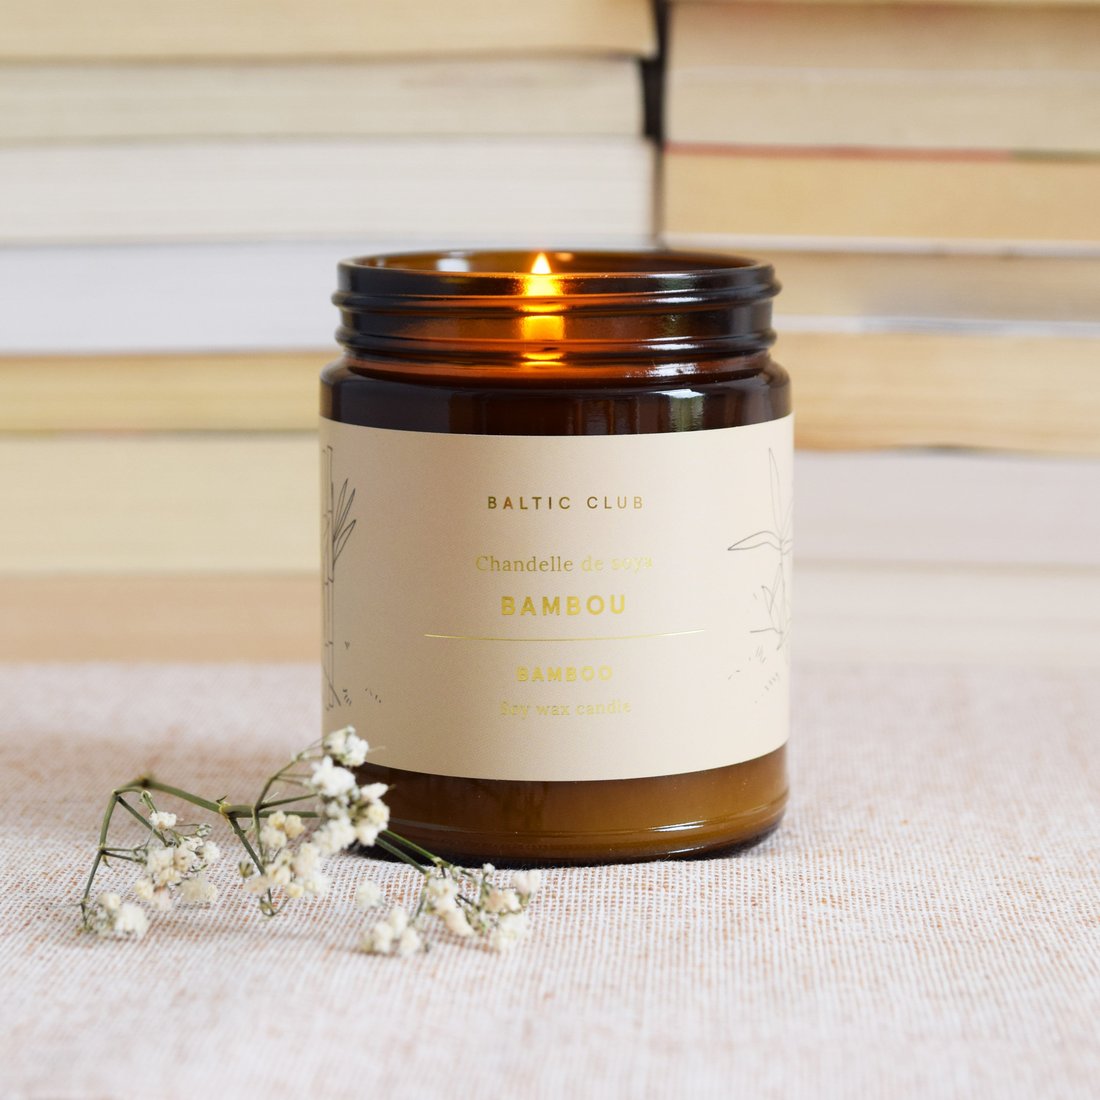 Baltic Club Bamboo Soy Candle